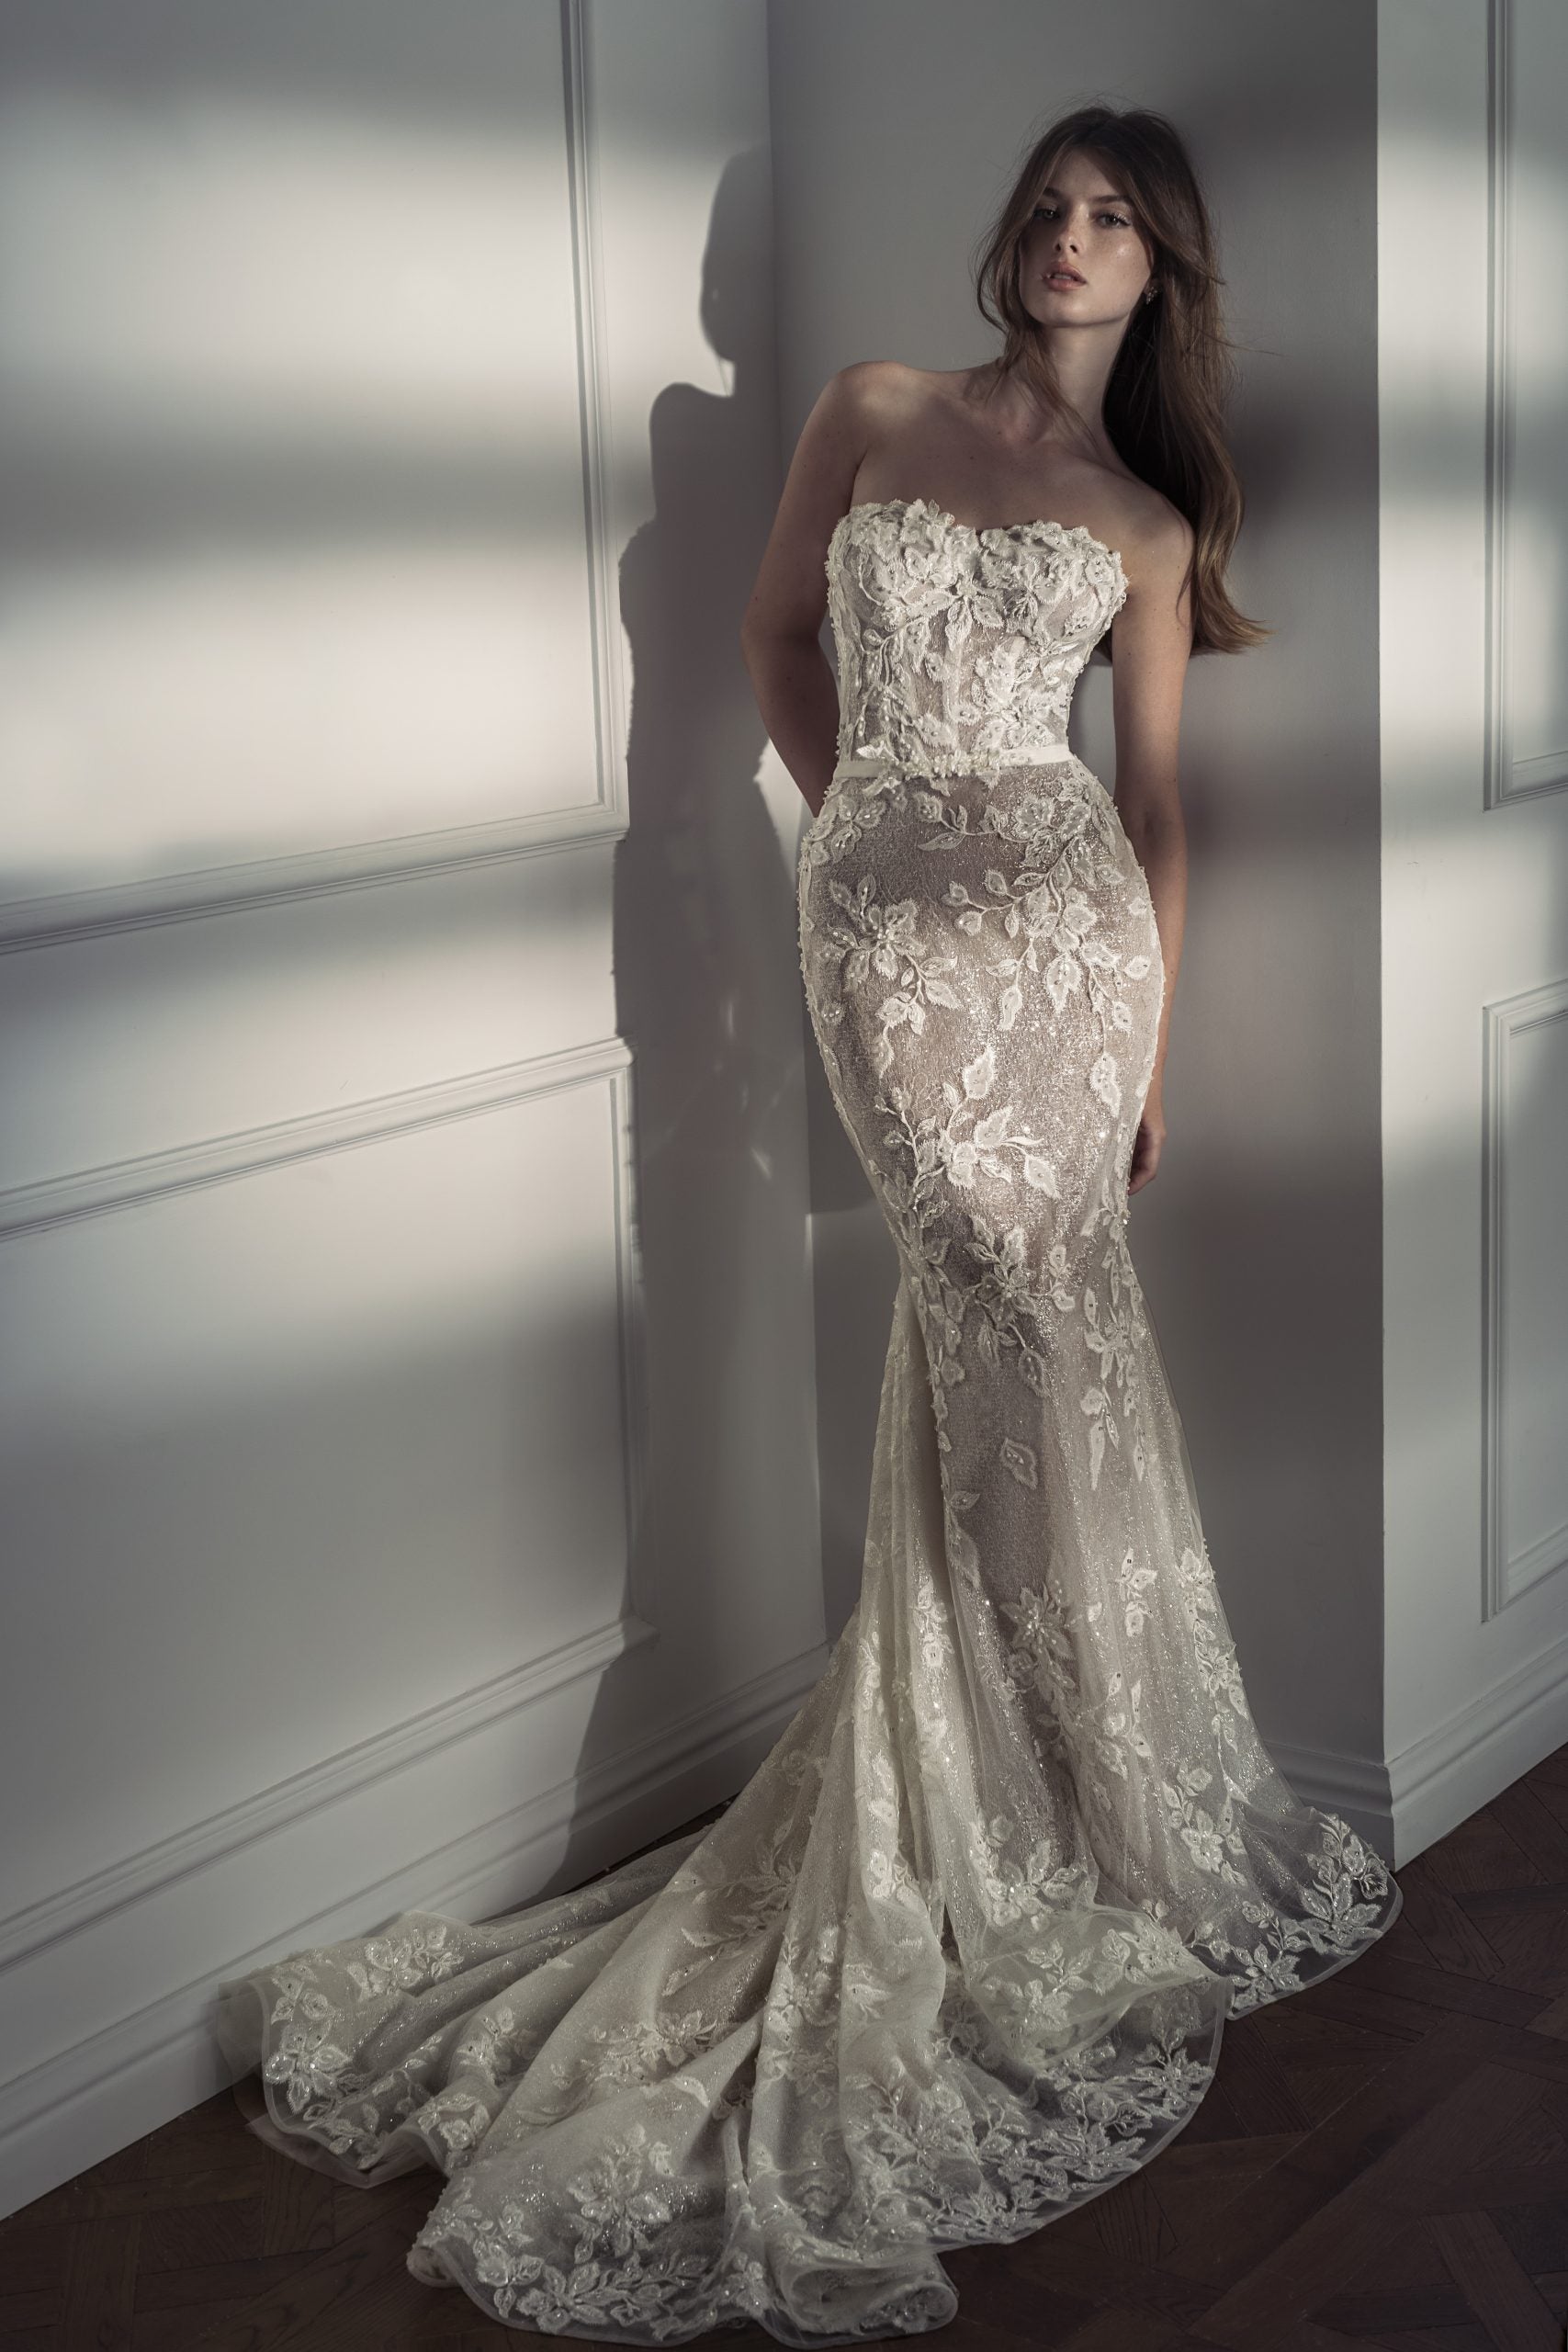 Strapless Lace Fit-and-Flare Gown by Netta BenShabu Elite Couture - Image 1